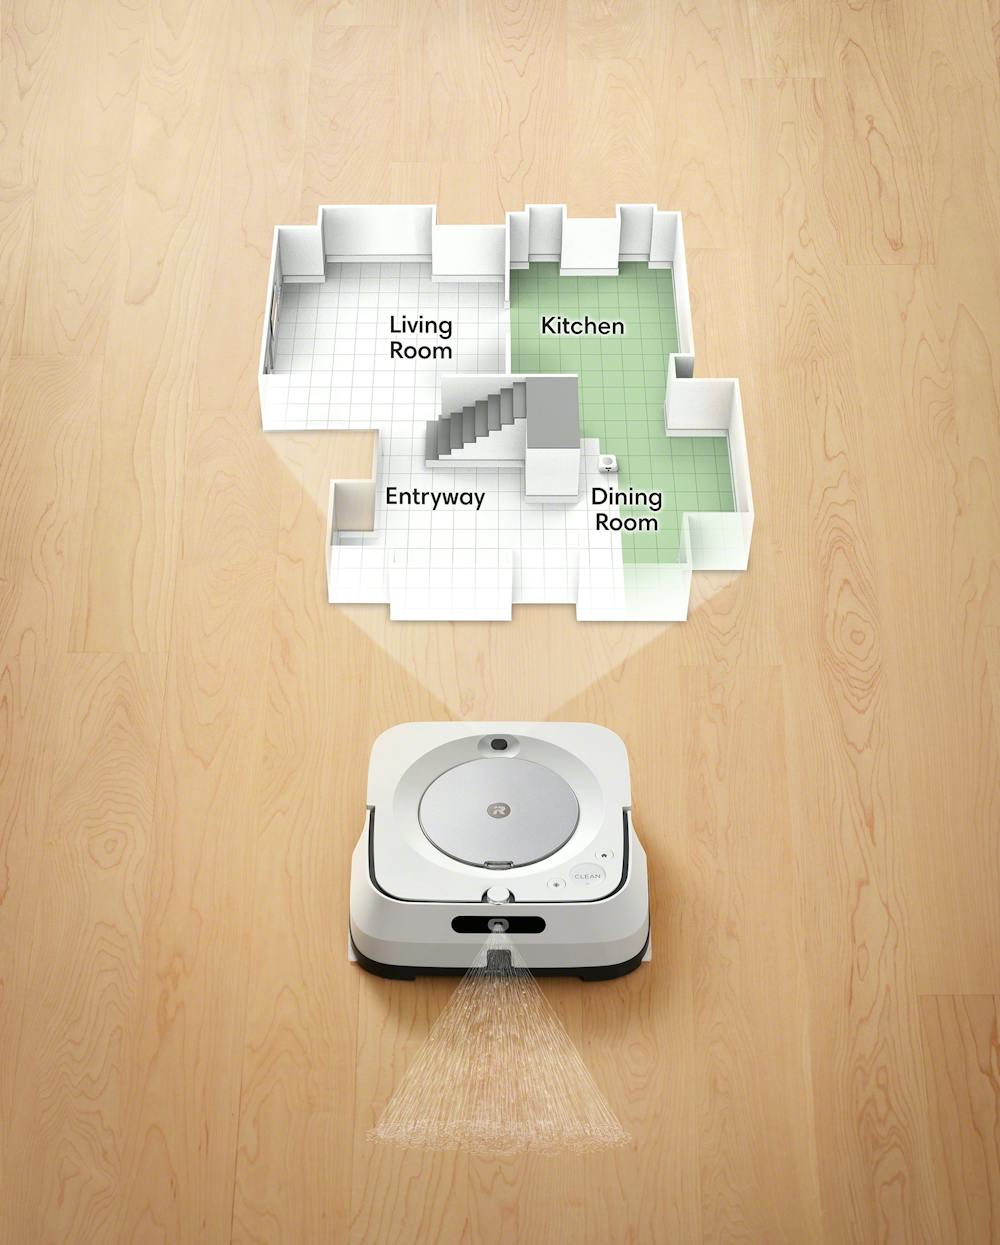 dominates the smart home; now privacy groups oppose iRobot deal